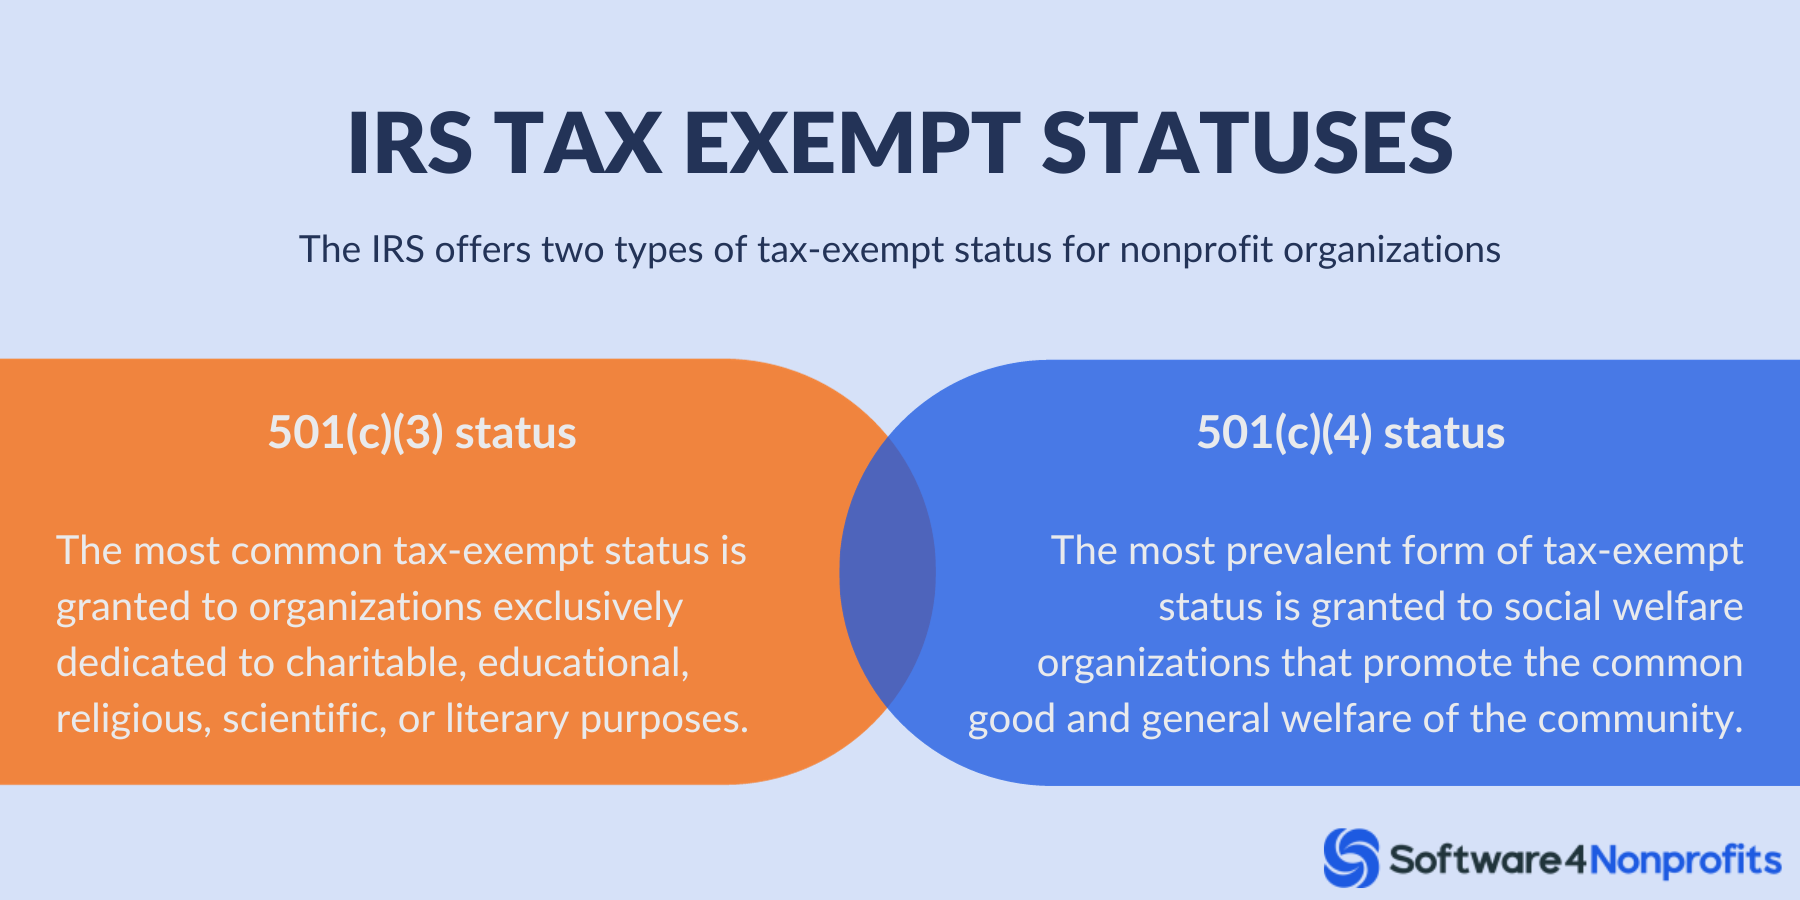 IRS Tax Exempt Statuses